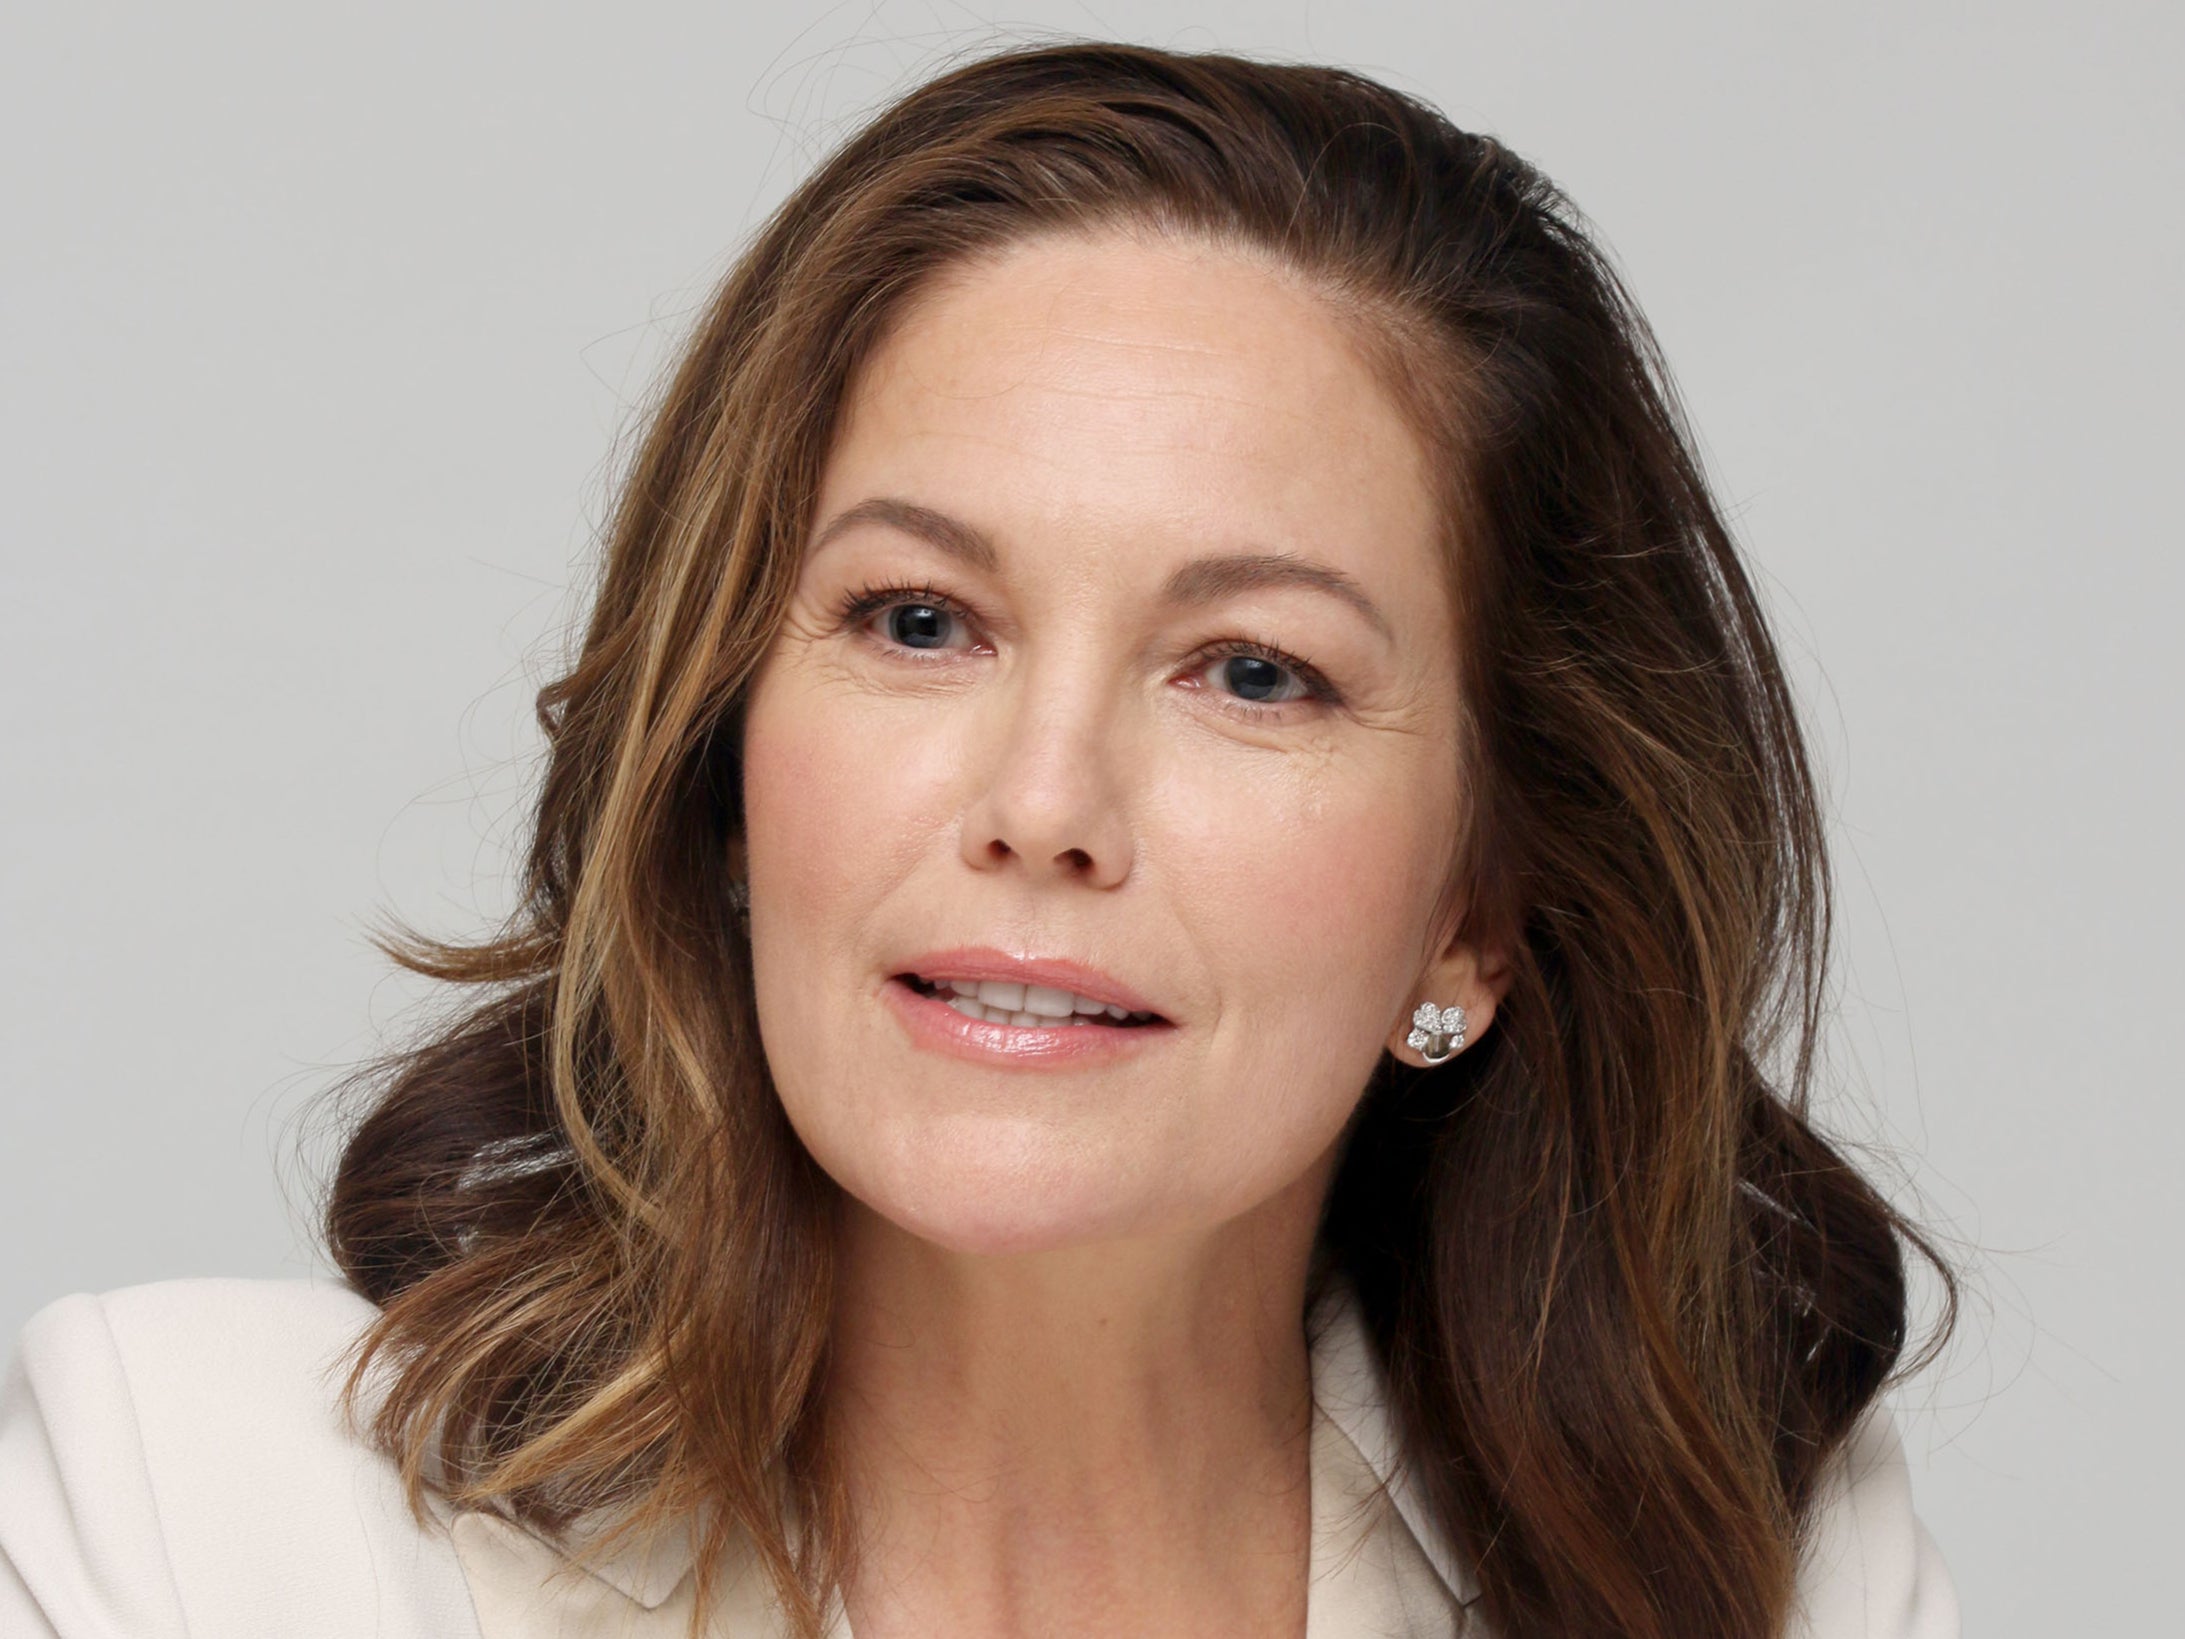 ‘I’m grateful to be working in an industry that is increasing its appreciation of women:' Diane Lane discusses her career and new film ‘Let Him Go’